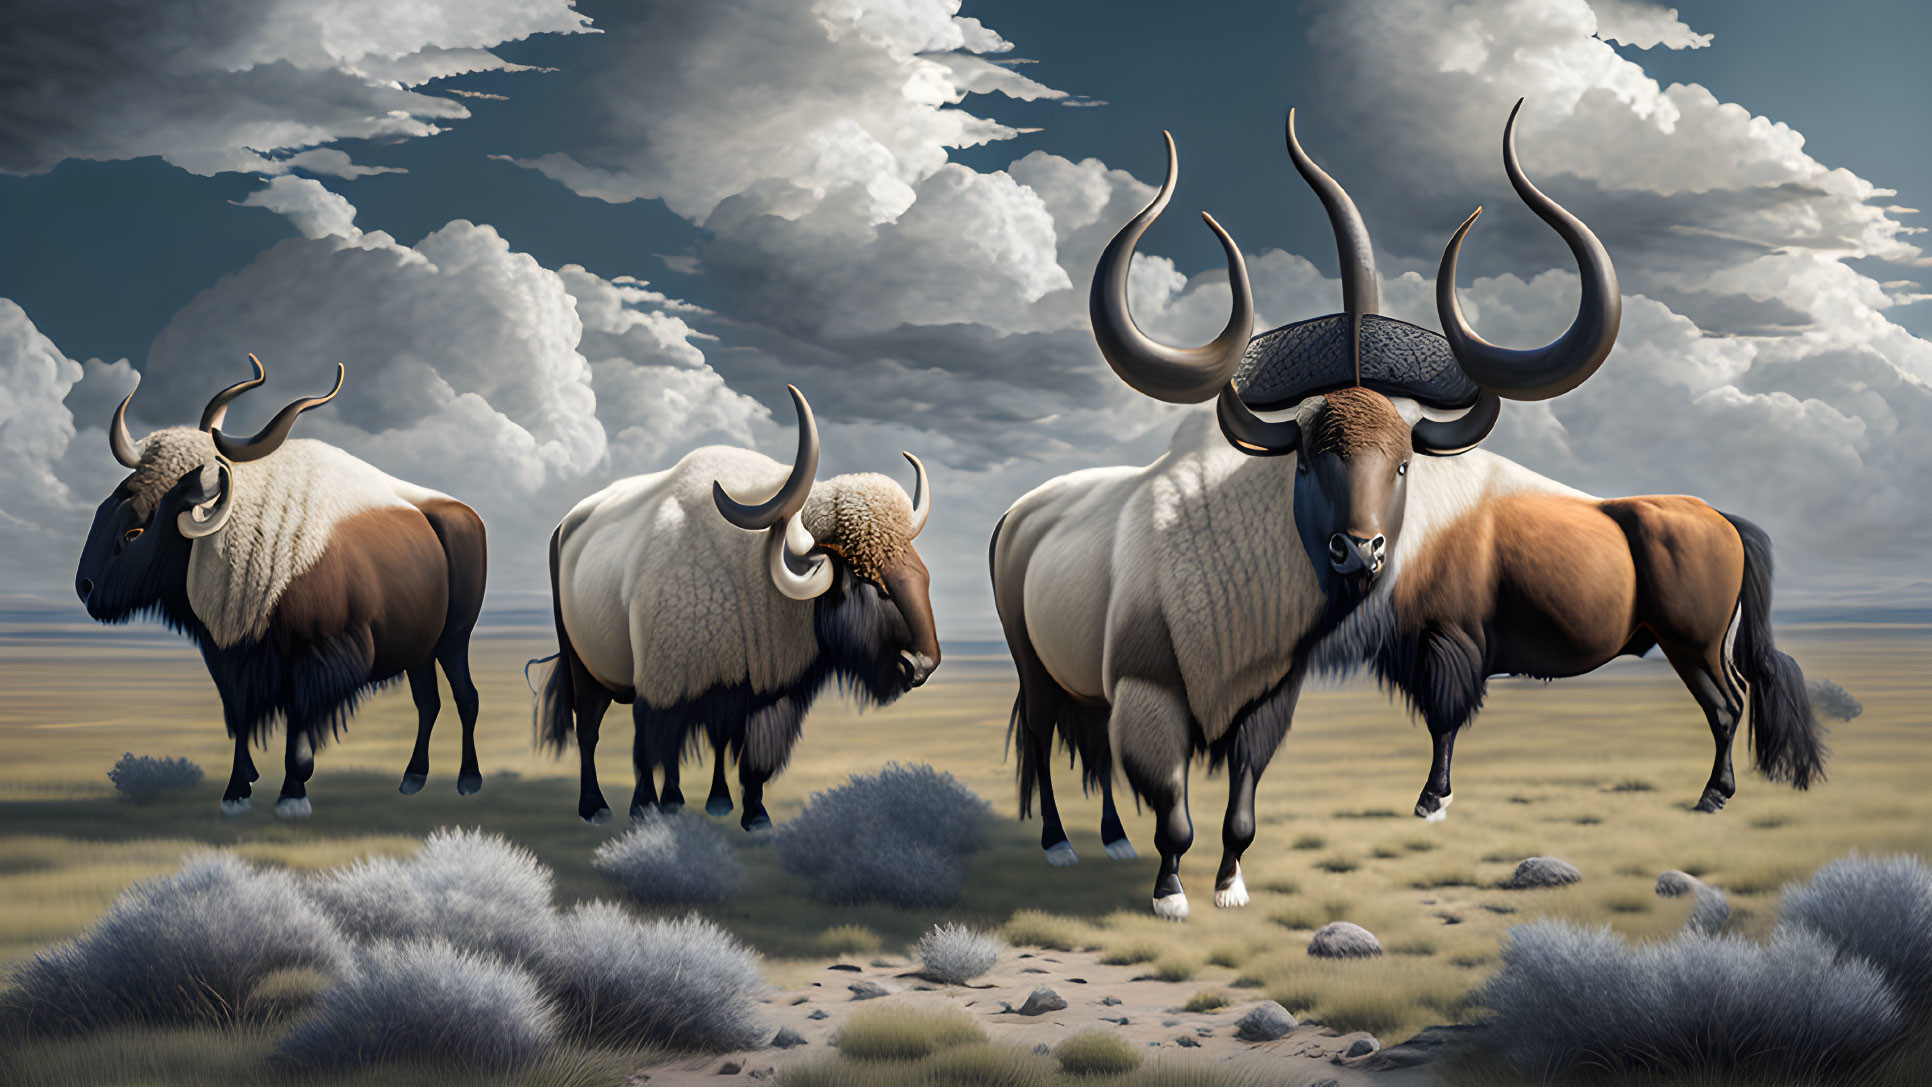 Realistic antelopes with large curved horns on grassy plain